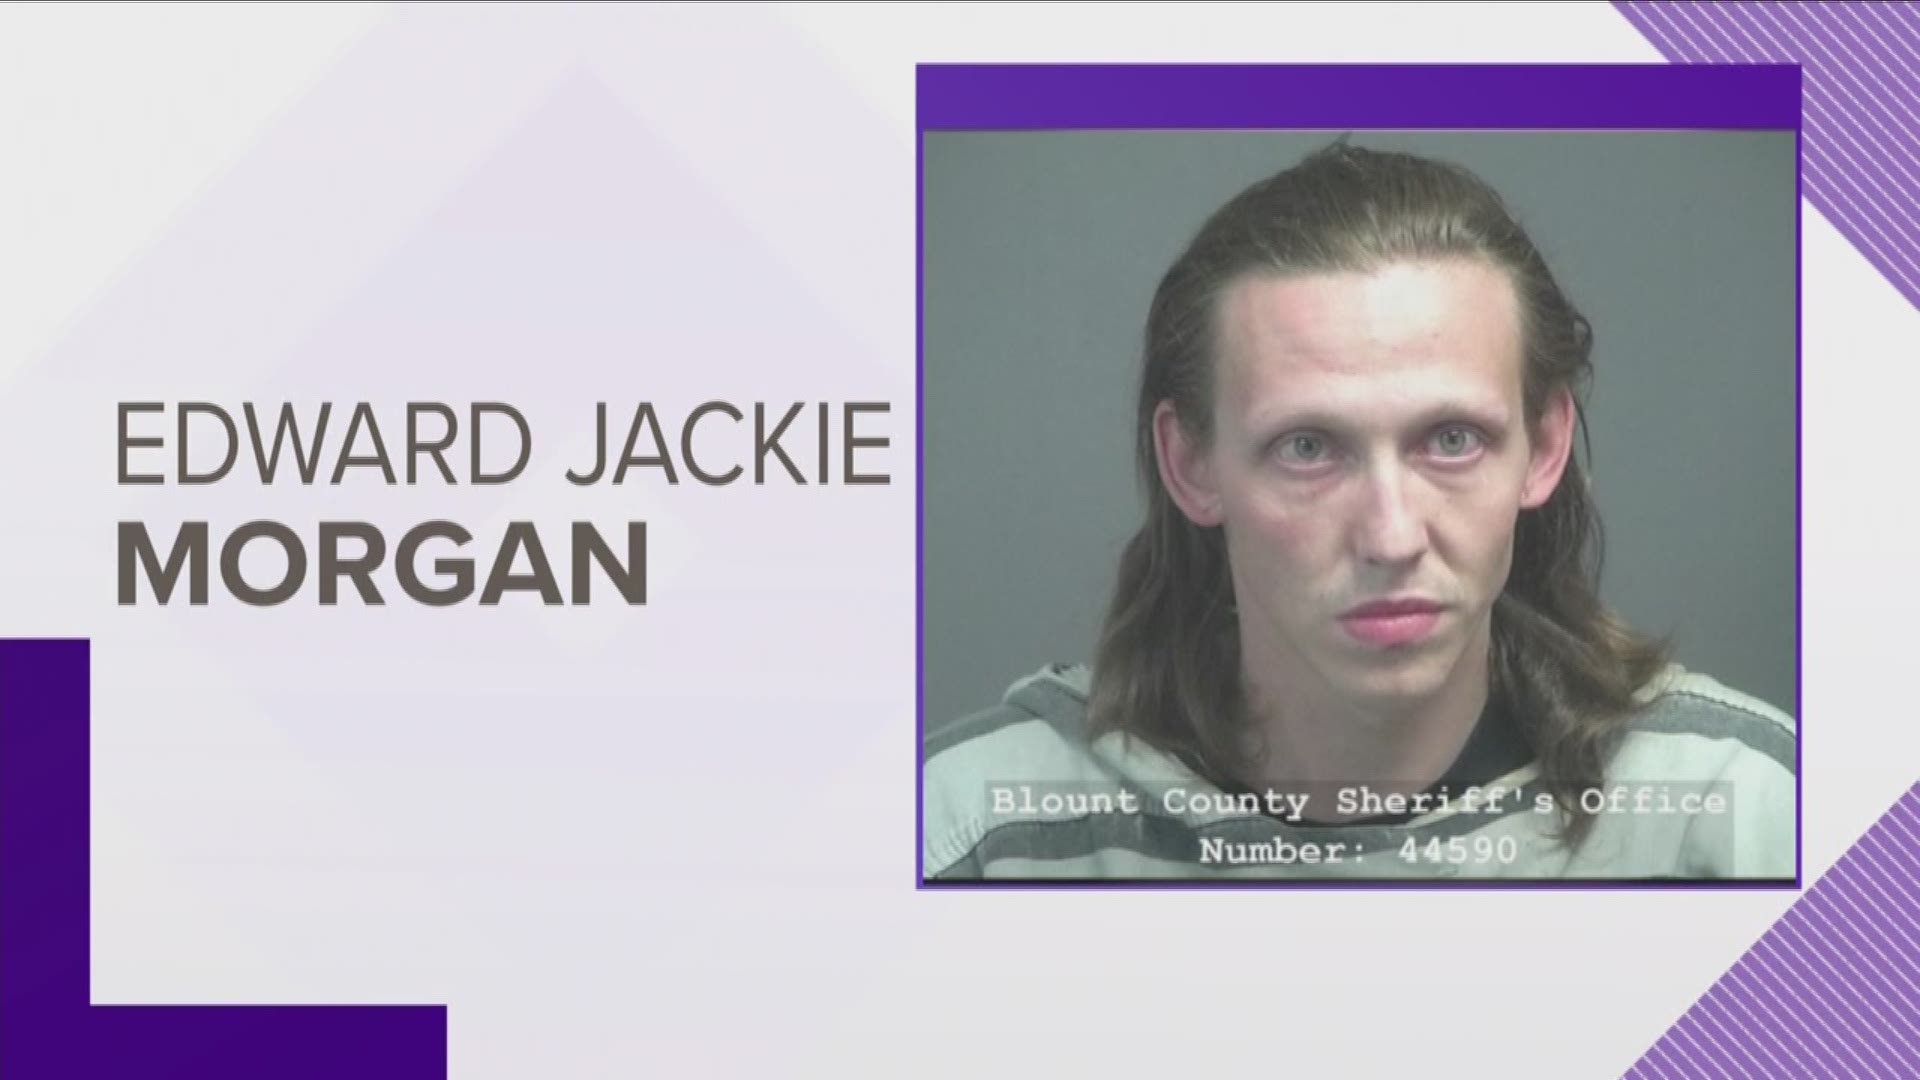 Louisville man Edward Jackie Morgan was arrested Friday for allegedly beating a woman repeatedly and holding her captive.